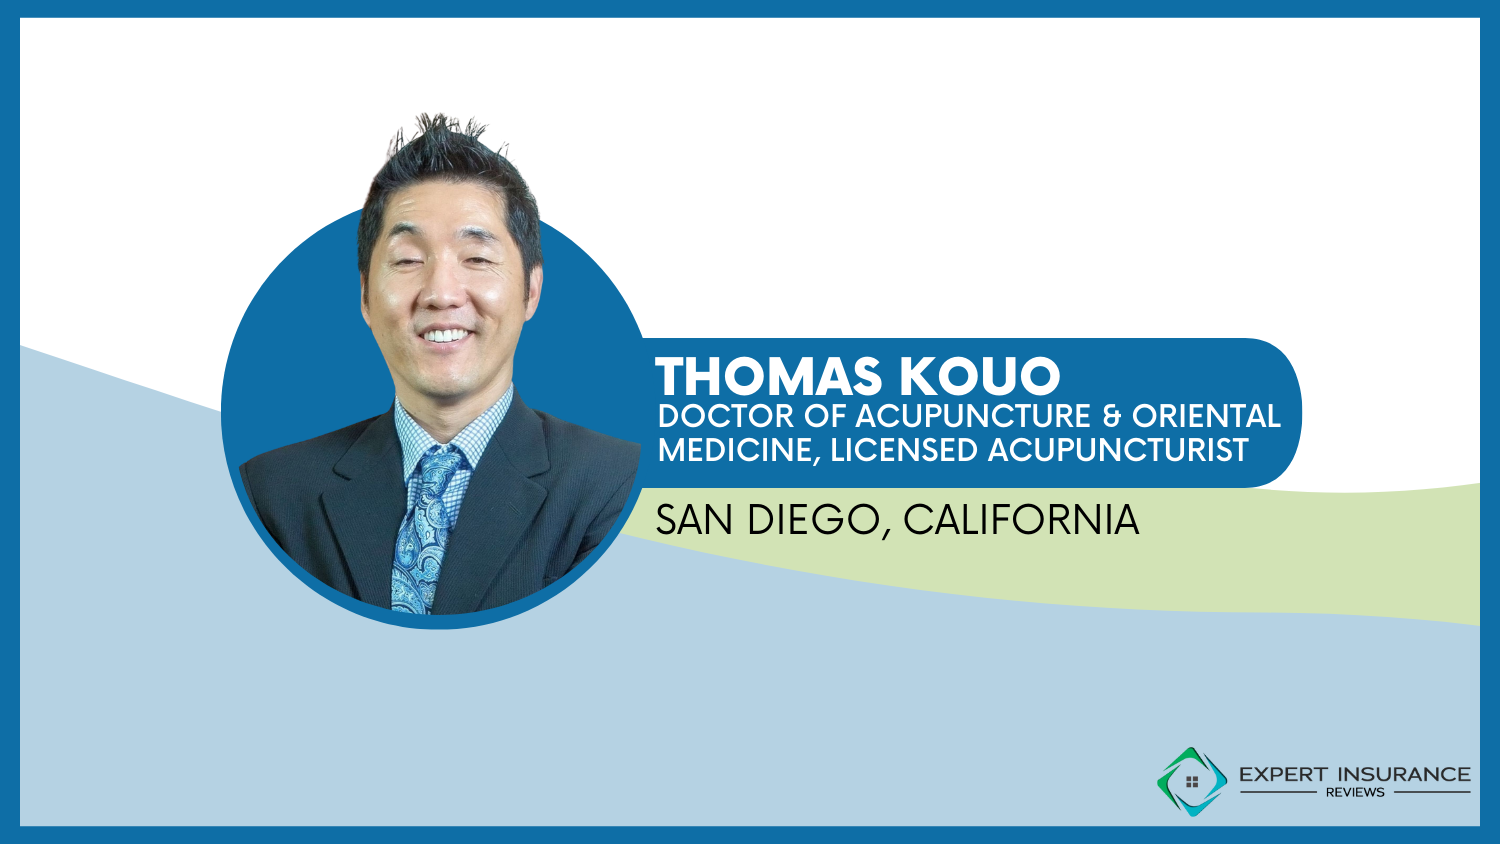 Best Acupuncturists That Accept Medicare: Thomas Kouo